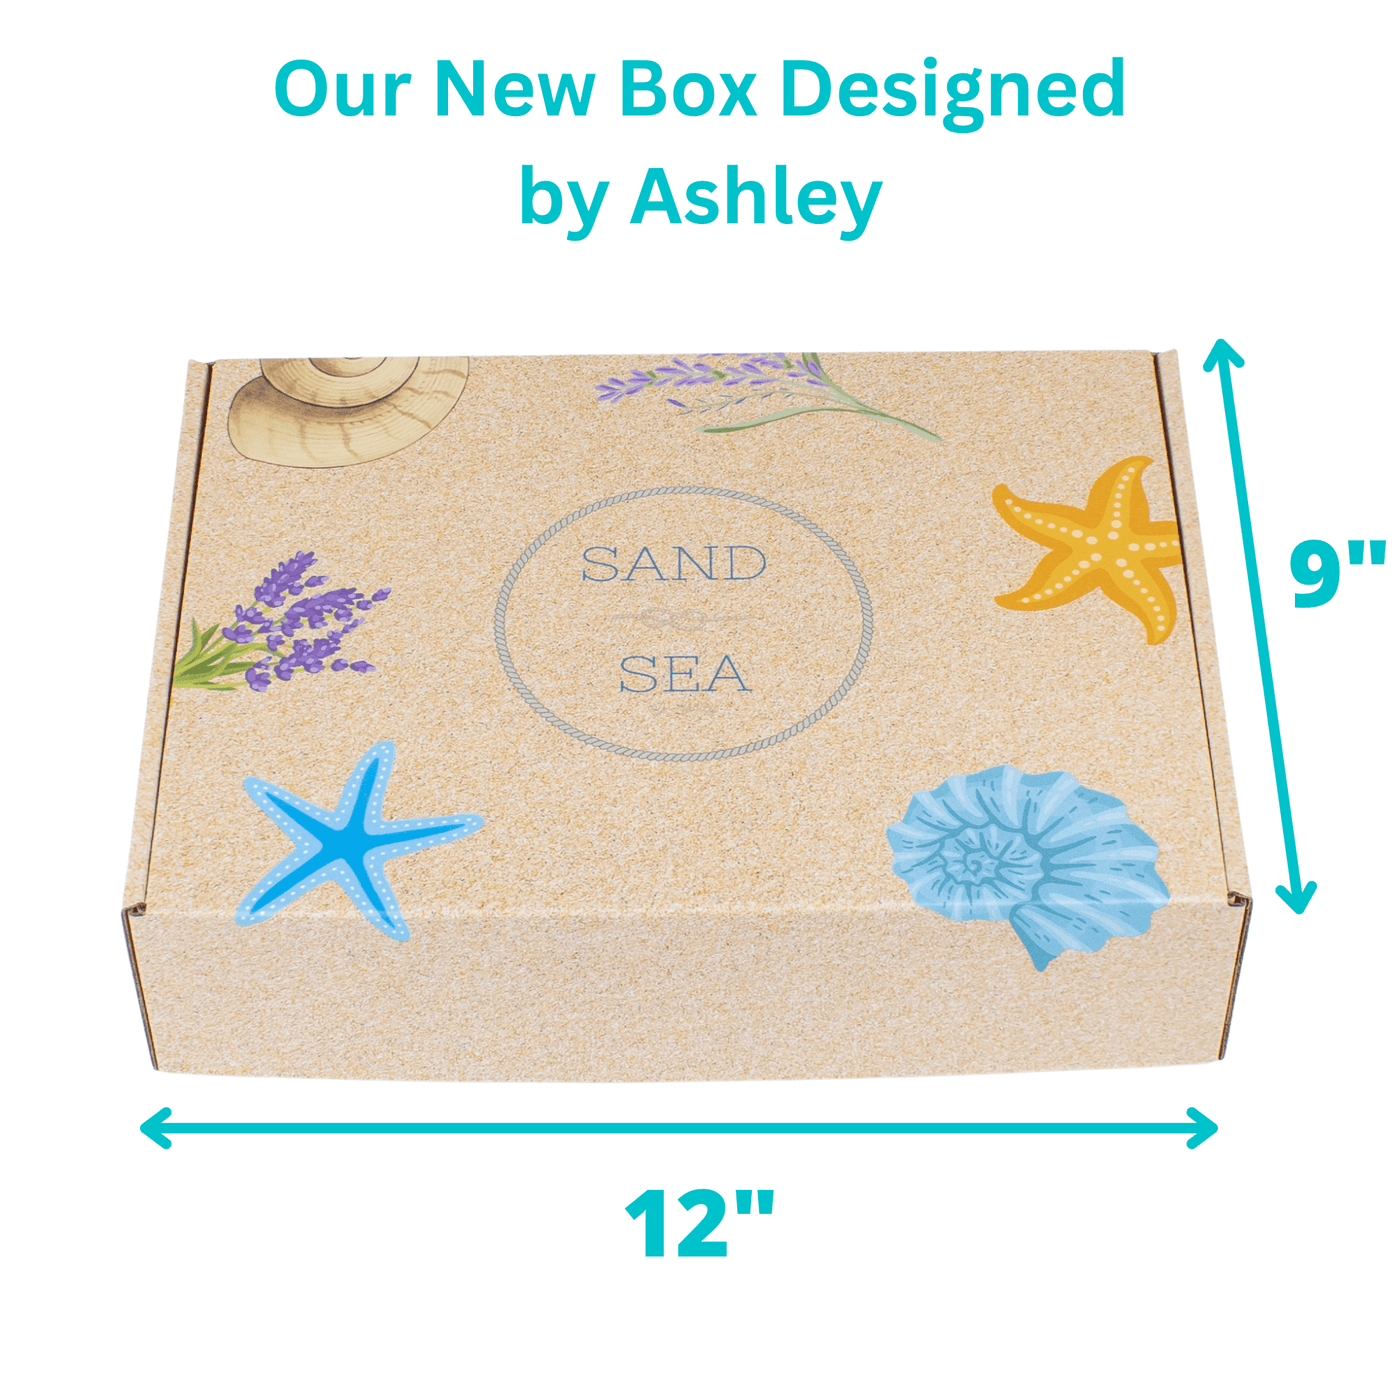 Happy Birthday Pampering Spa Gift Box for Her - Handmade Unique and Relaxing Stress Relief Spa Gift Baskets for Women Birthday - 13 pieces - Sand & Sea by Ashley